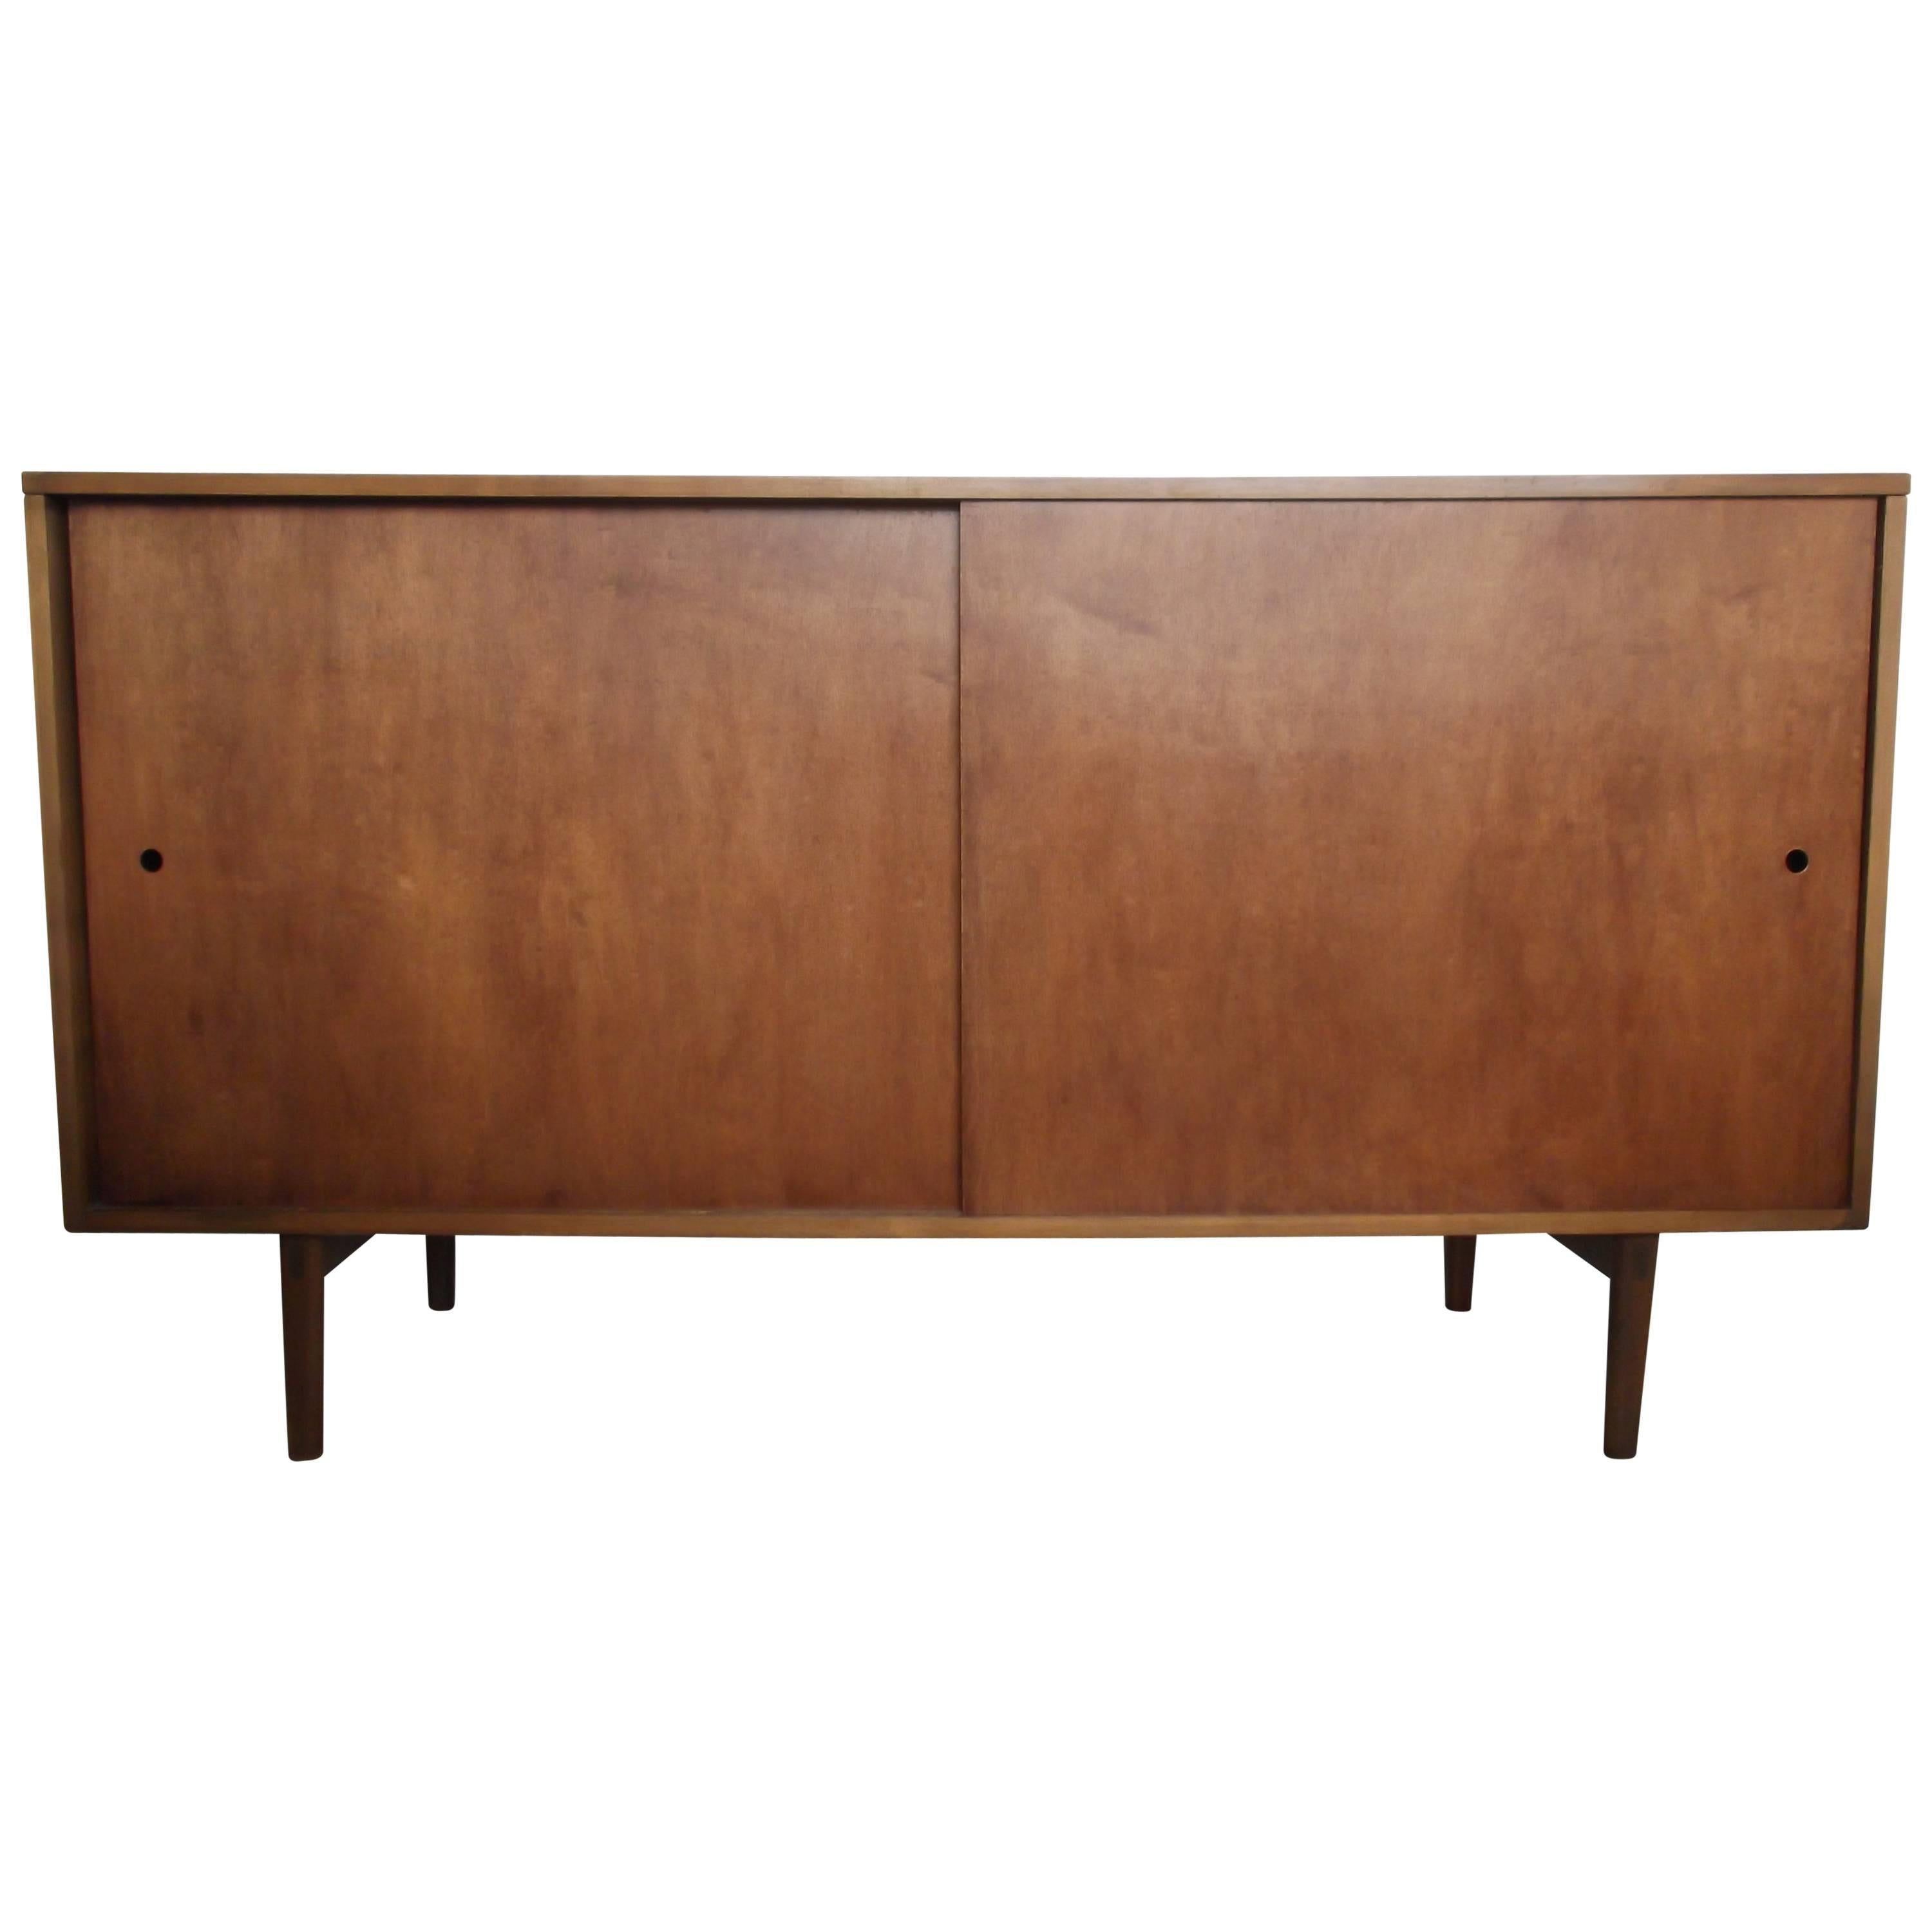 Paul McCobb Planner Group Credenza Sideboard with Walnut Finish